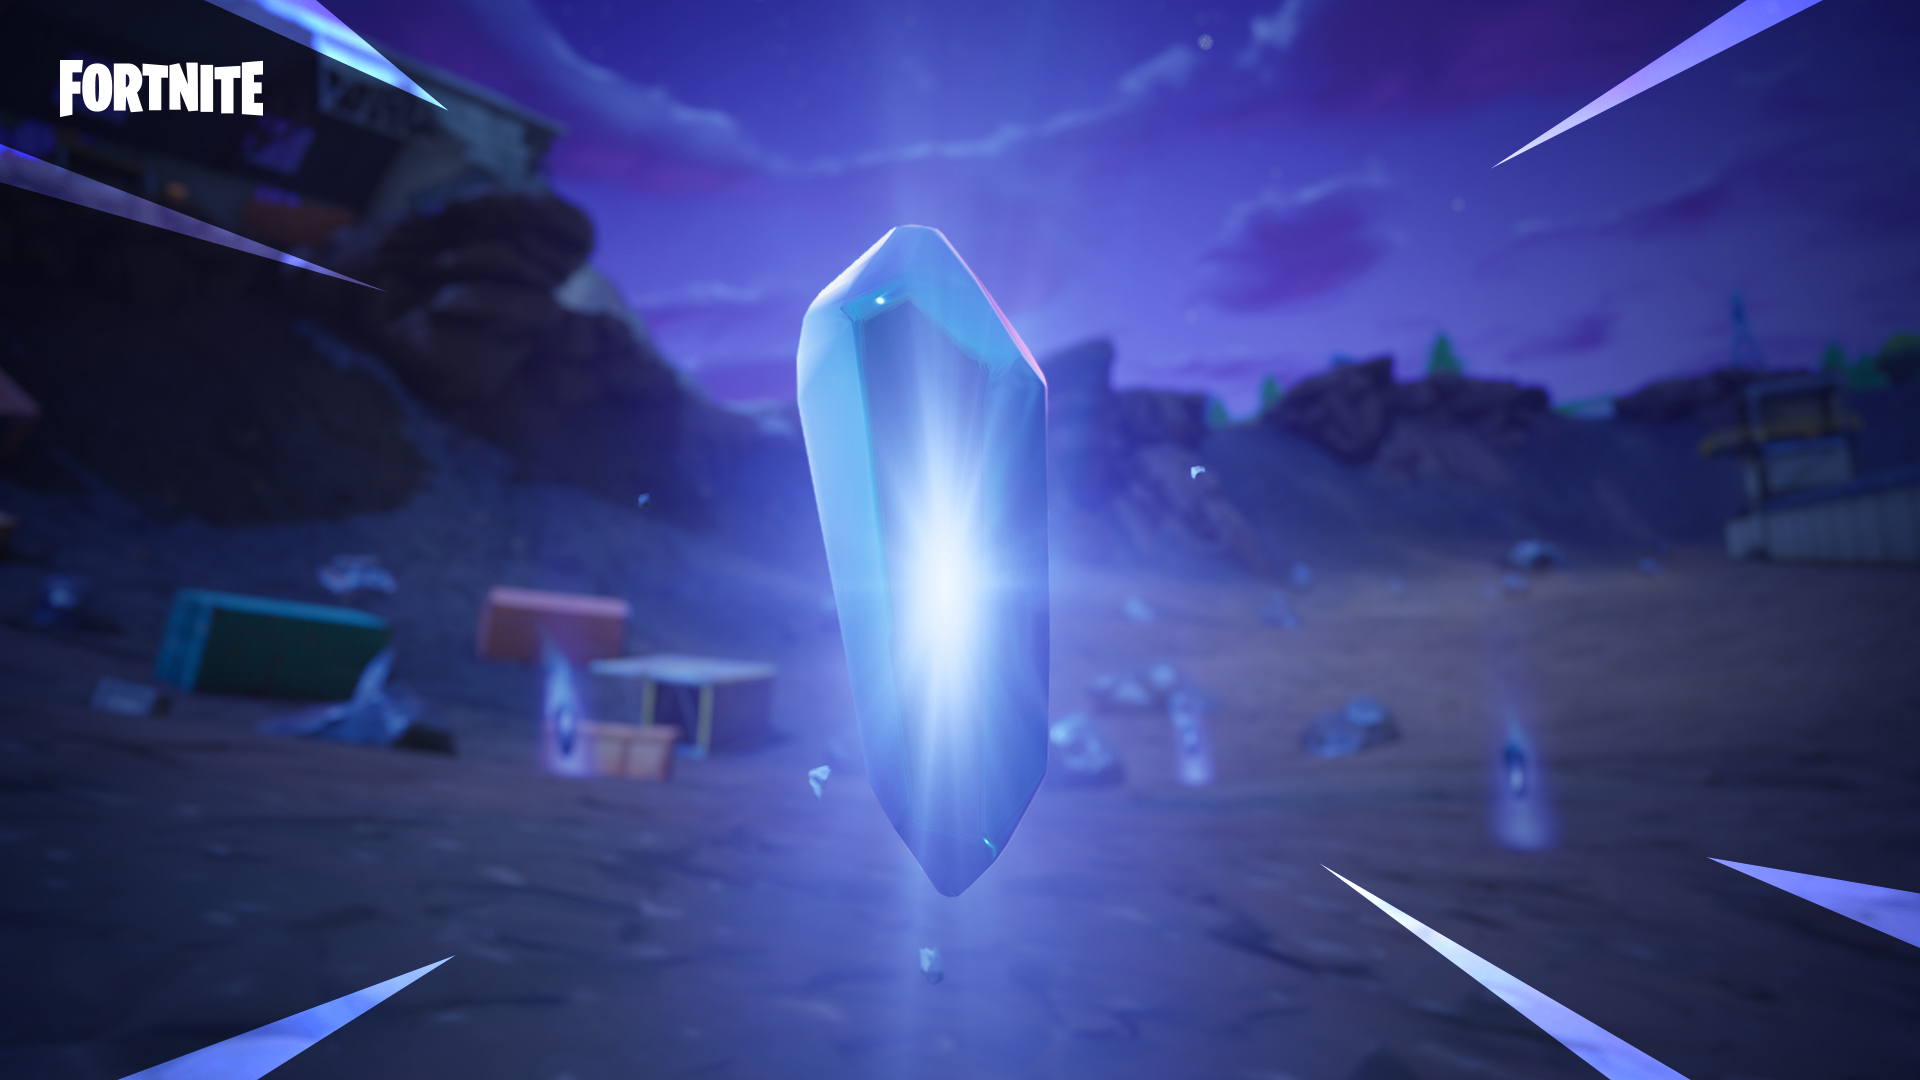 Gravity Stones Fortnite Fortnite Season 4 Starts Now With A Bang On Xbox One Xbox Wire